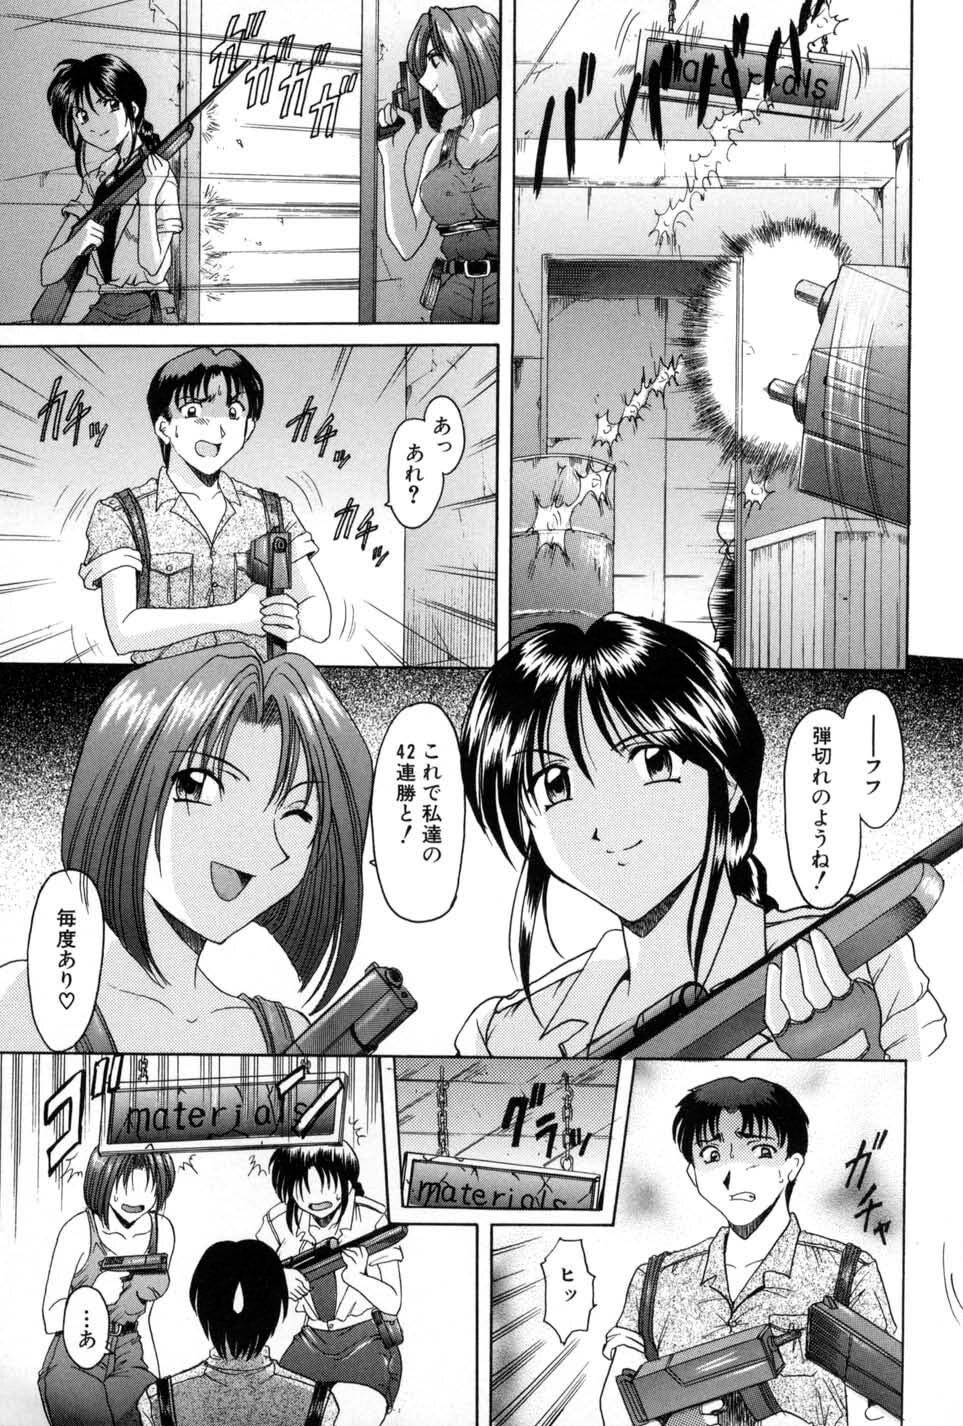 Relax Injyoku no Utage - Youre under arrest | taiho shichauzo Handsome - Page 7